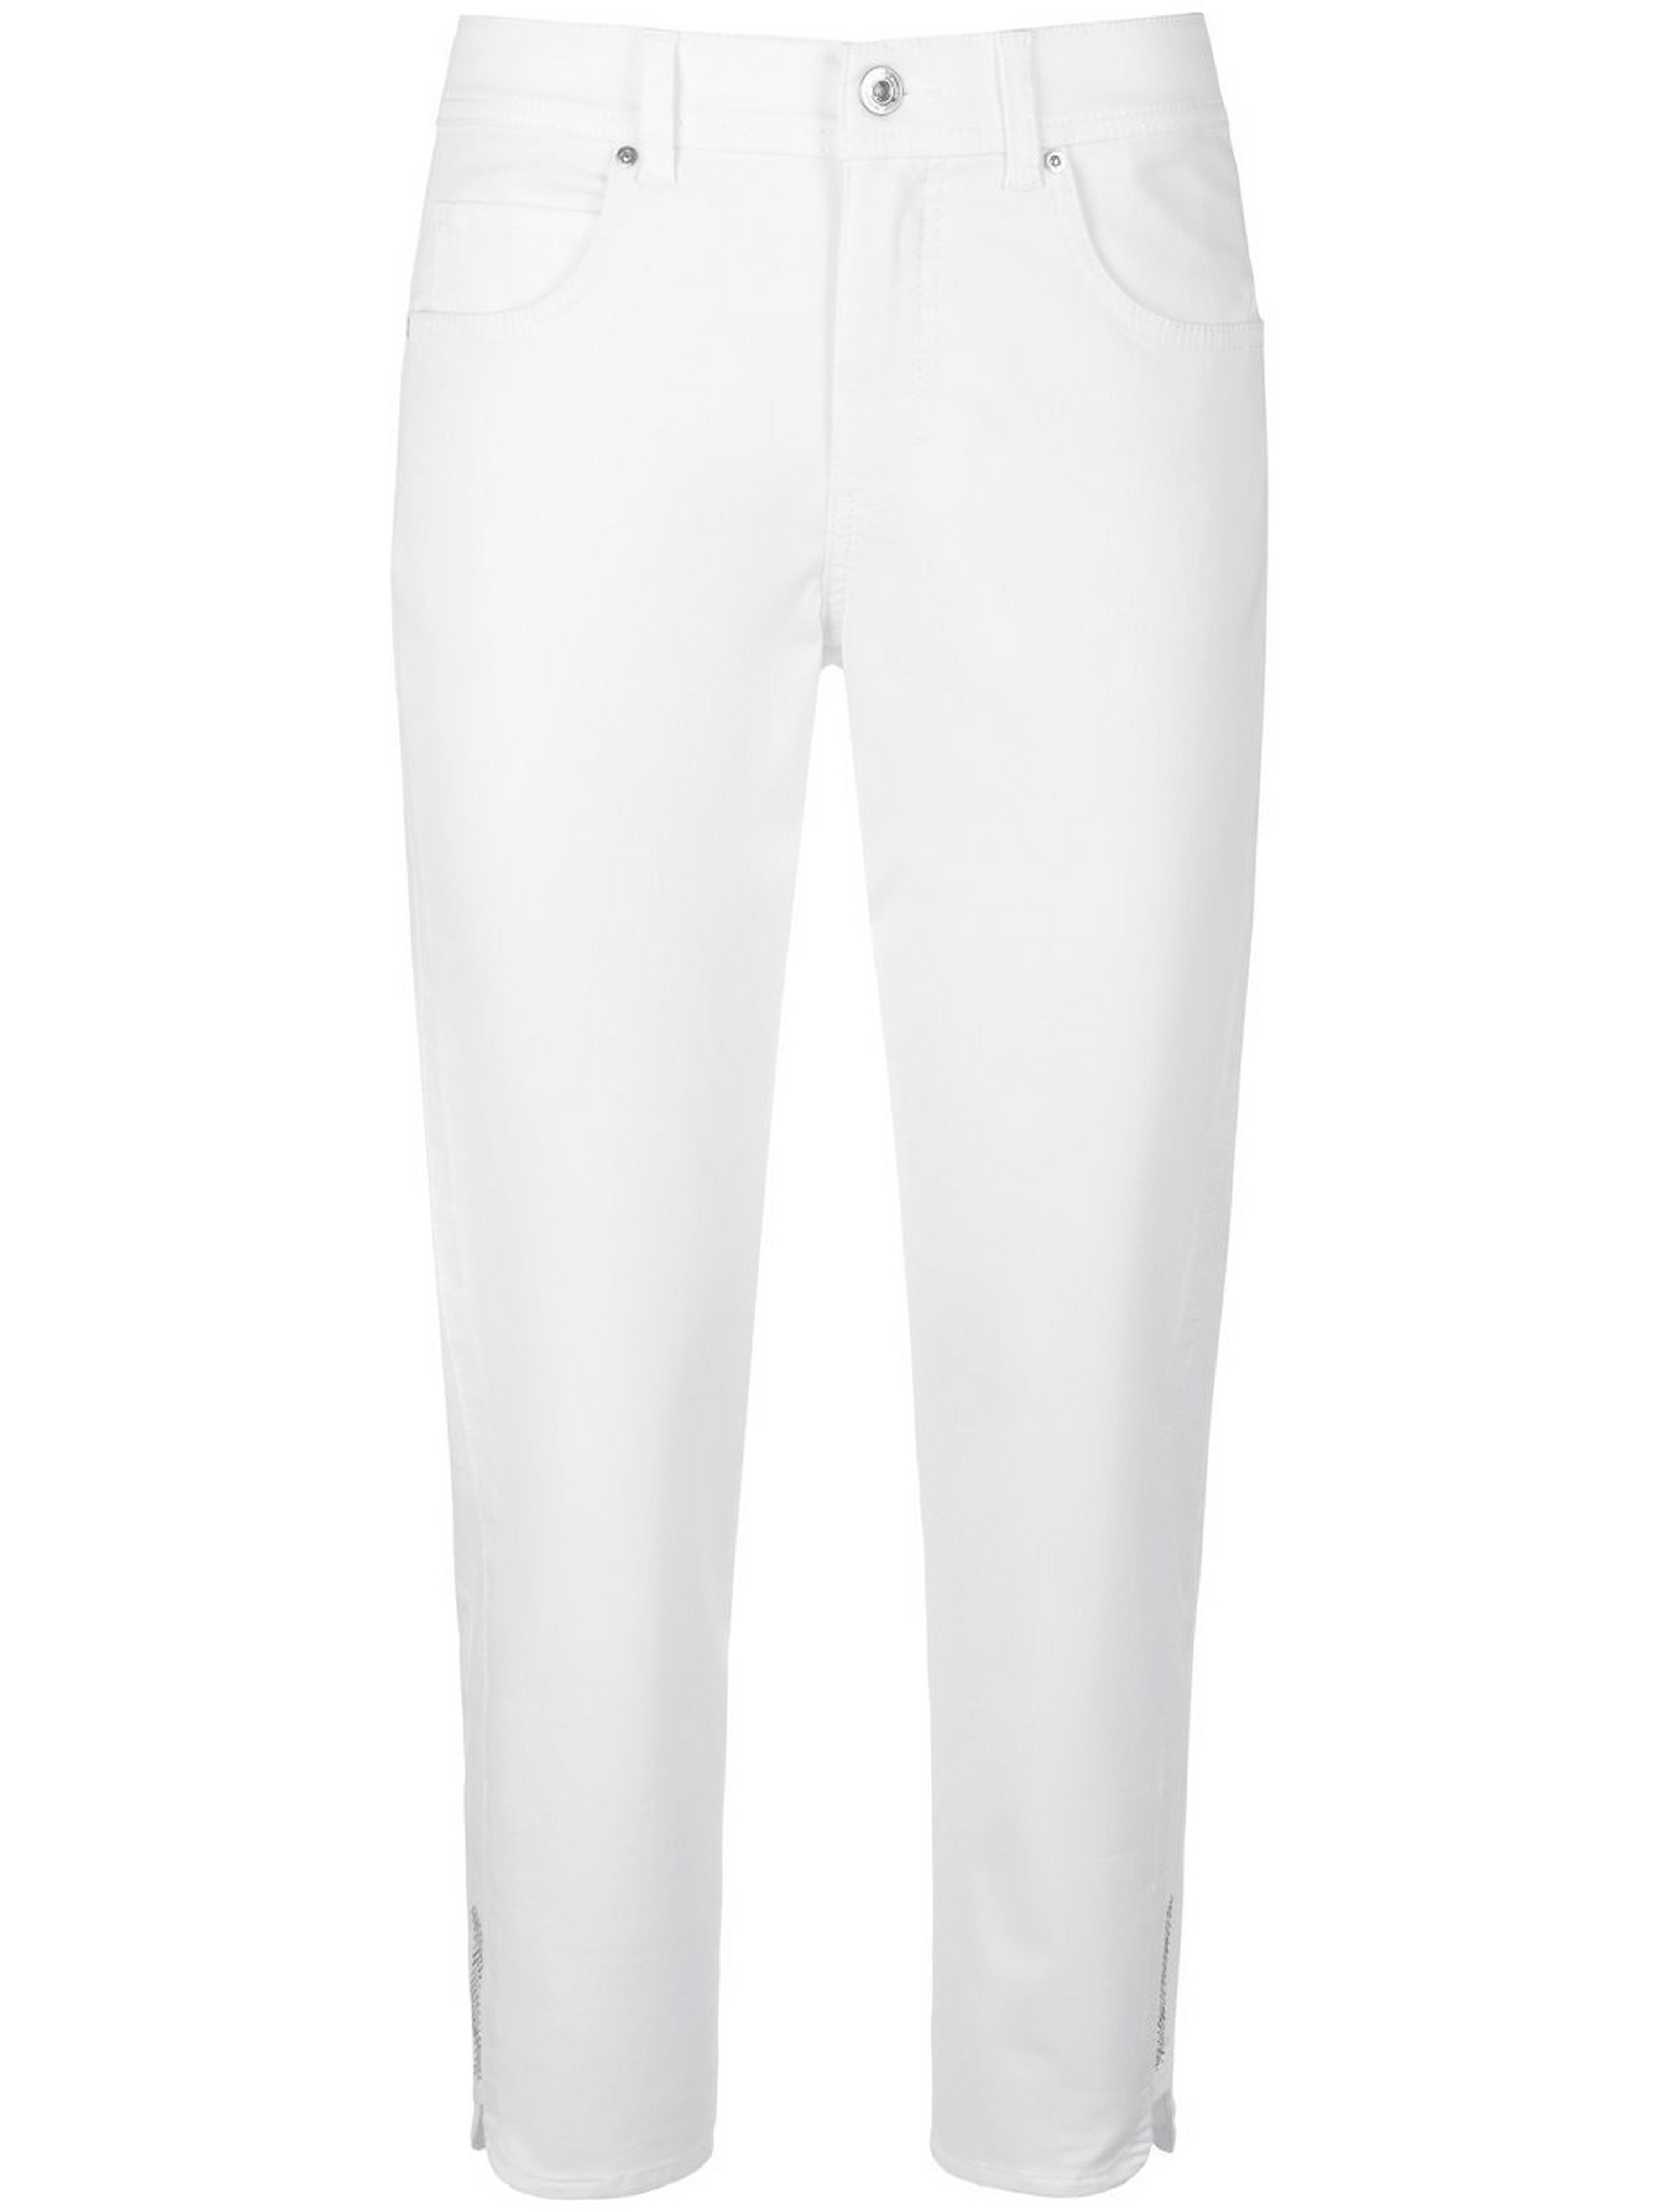 Le jean  ANGELS blanc taille 42